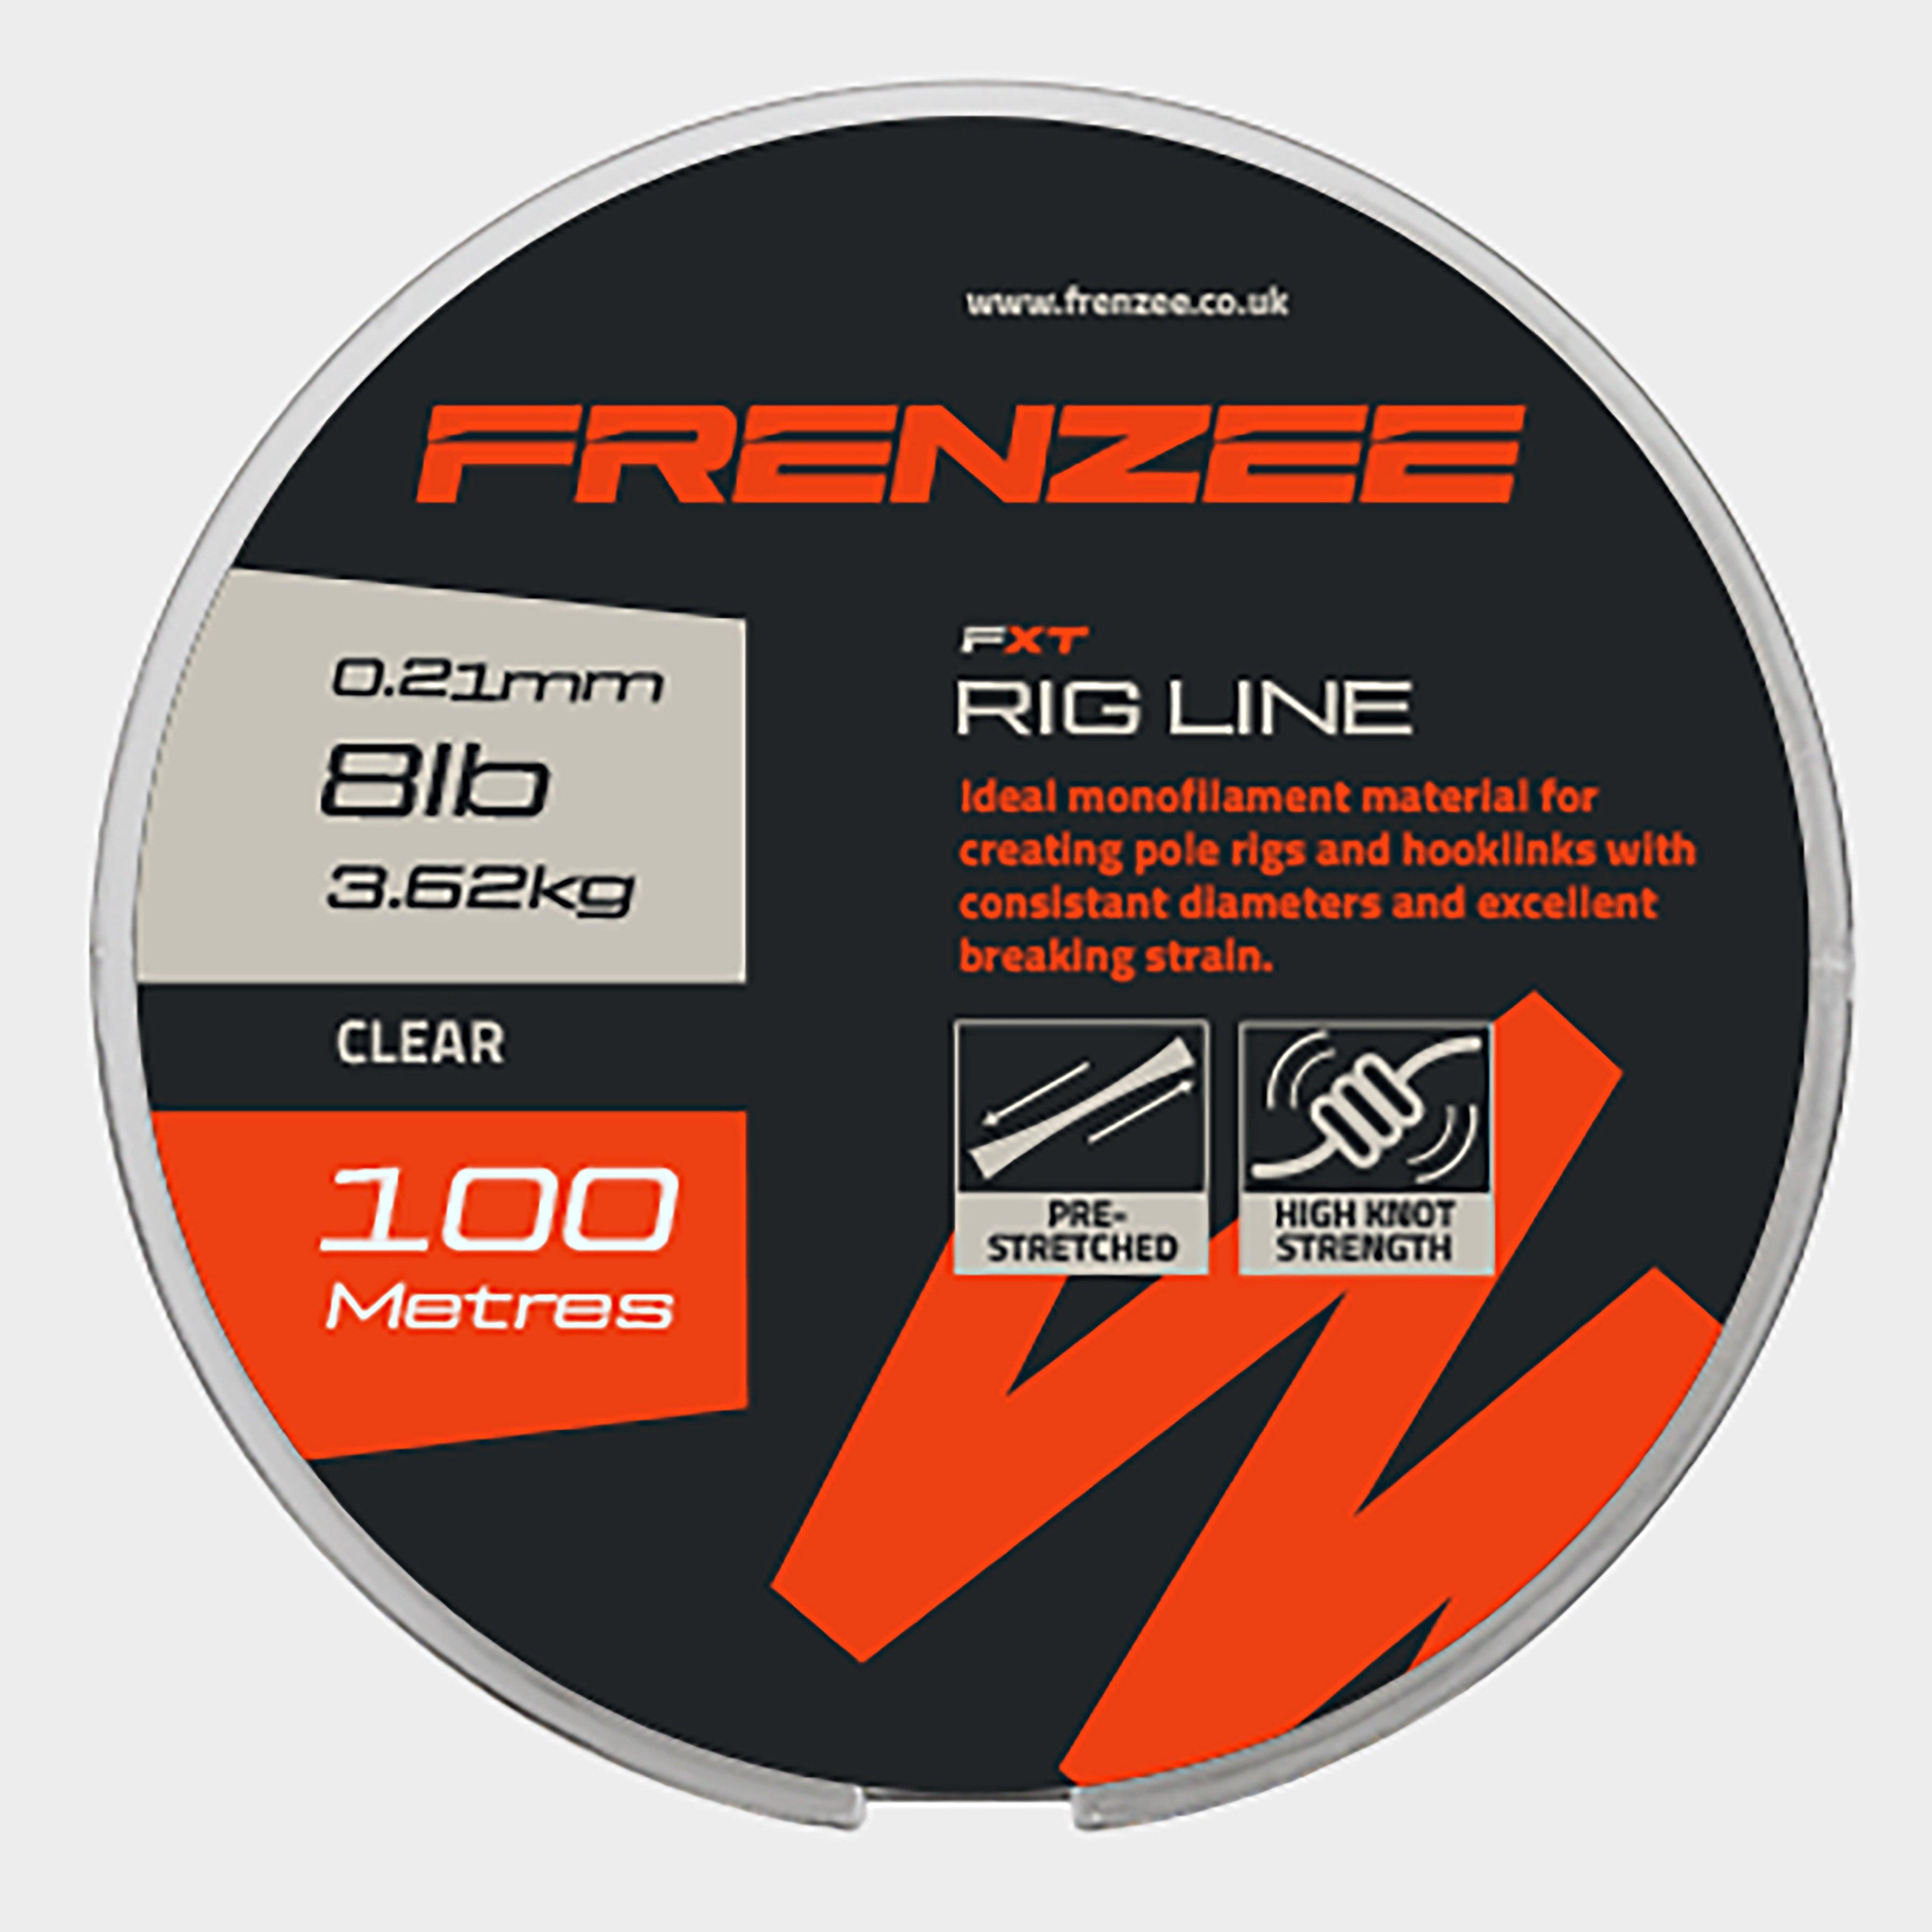 Photos - Fishing Line Clear Frenzee FXT Rig Line 0.21mm 3.62kg 8lb, 